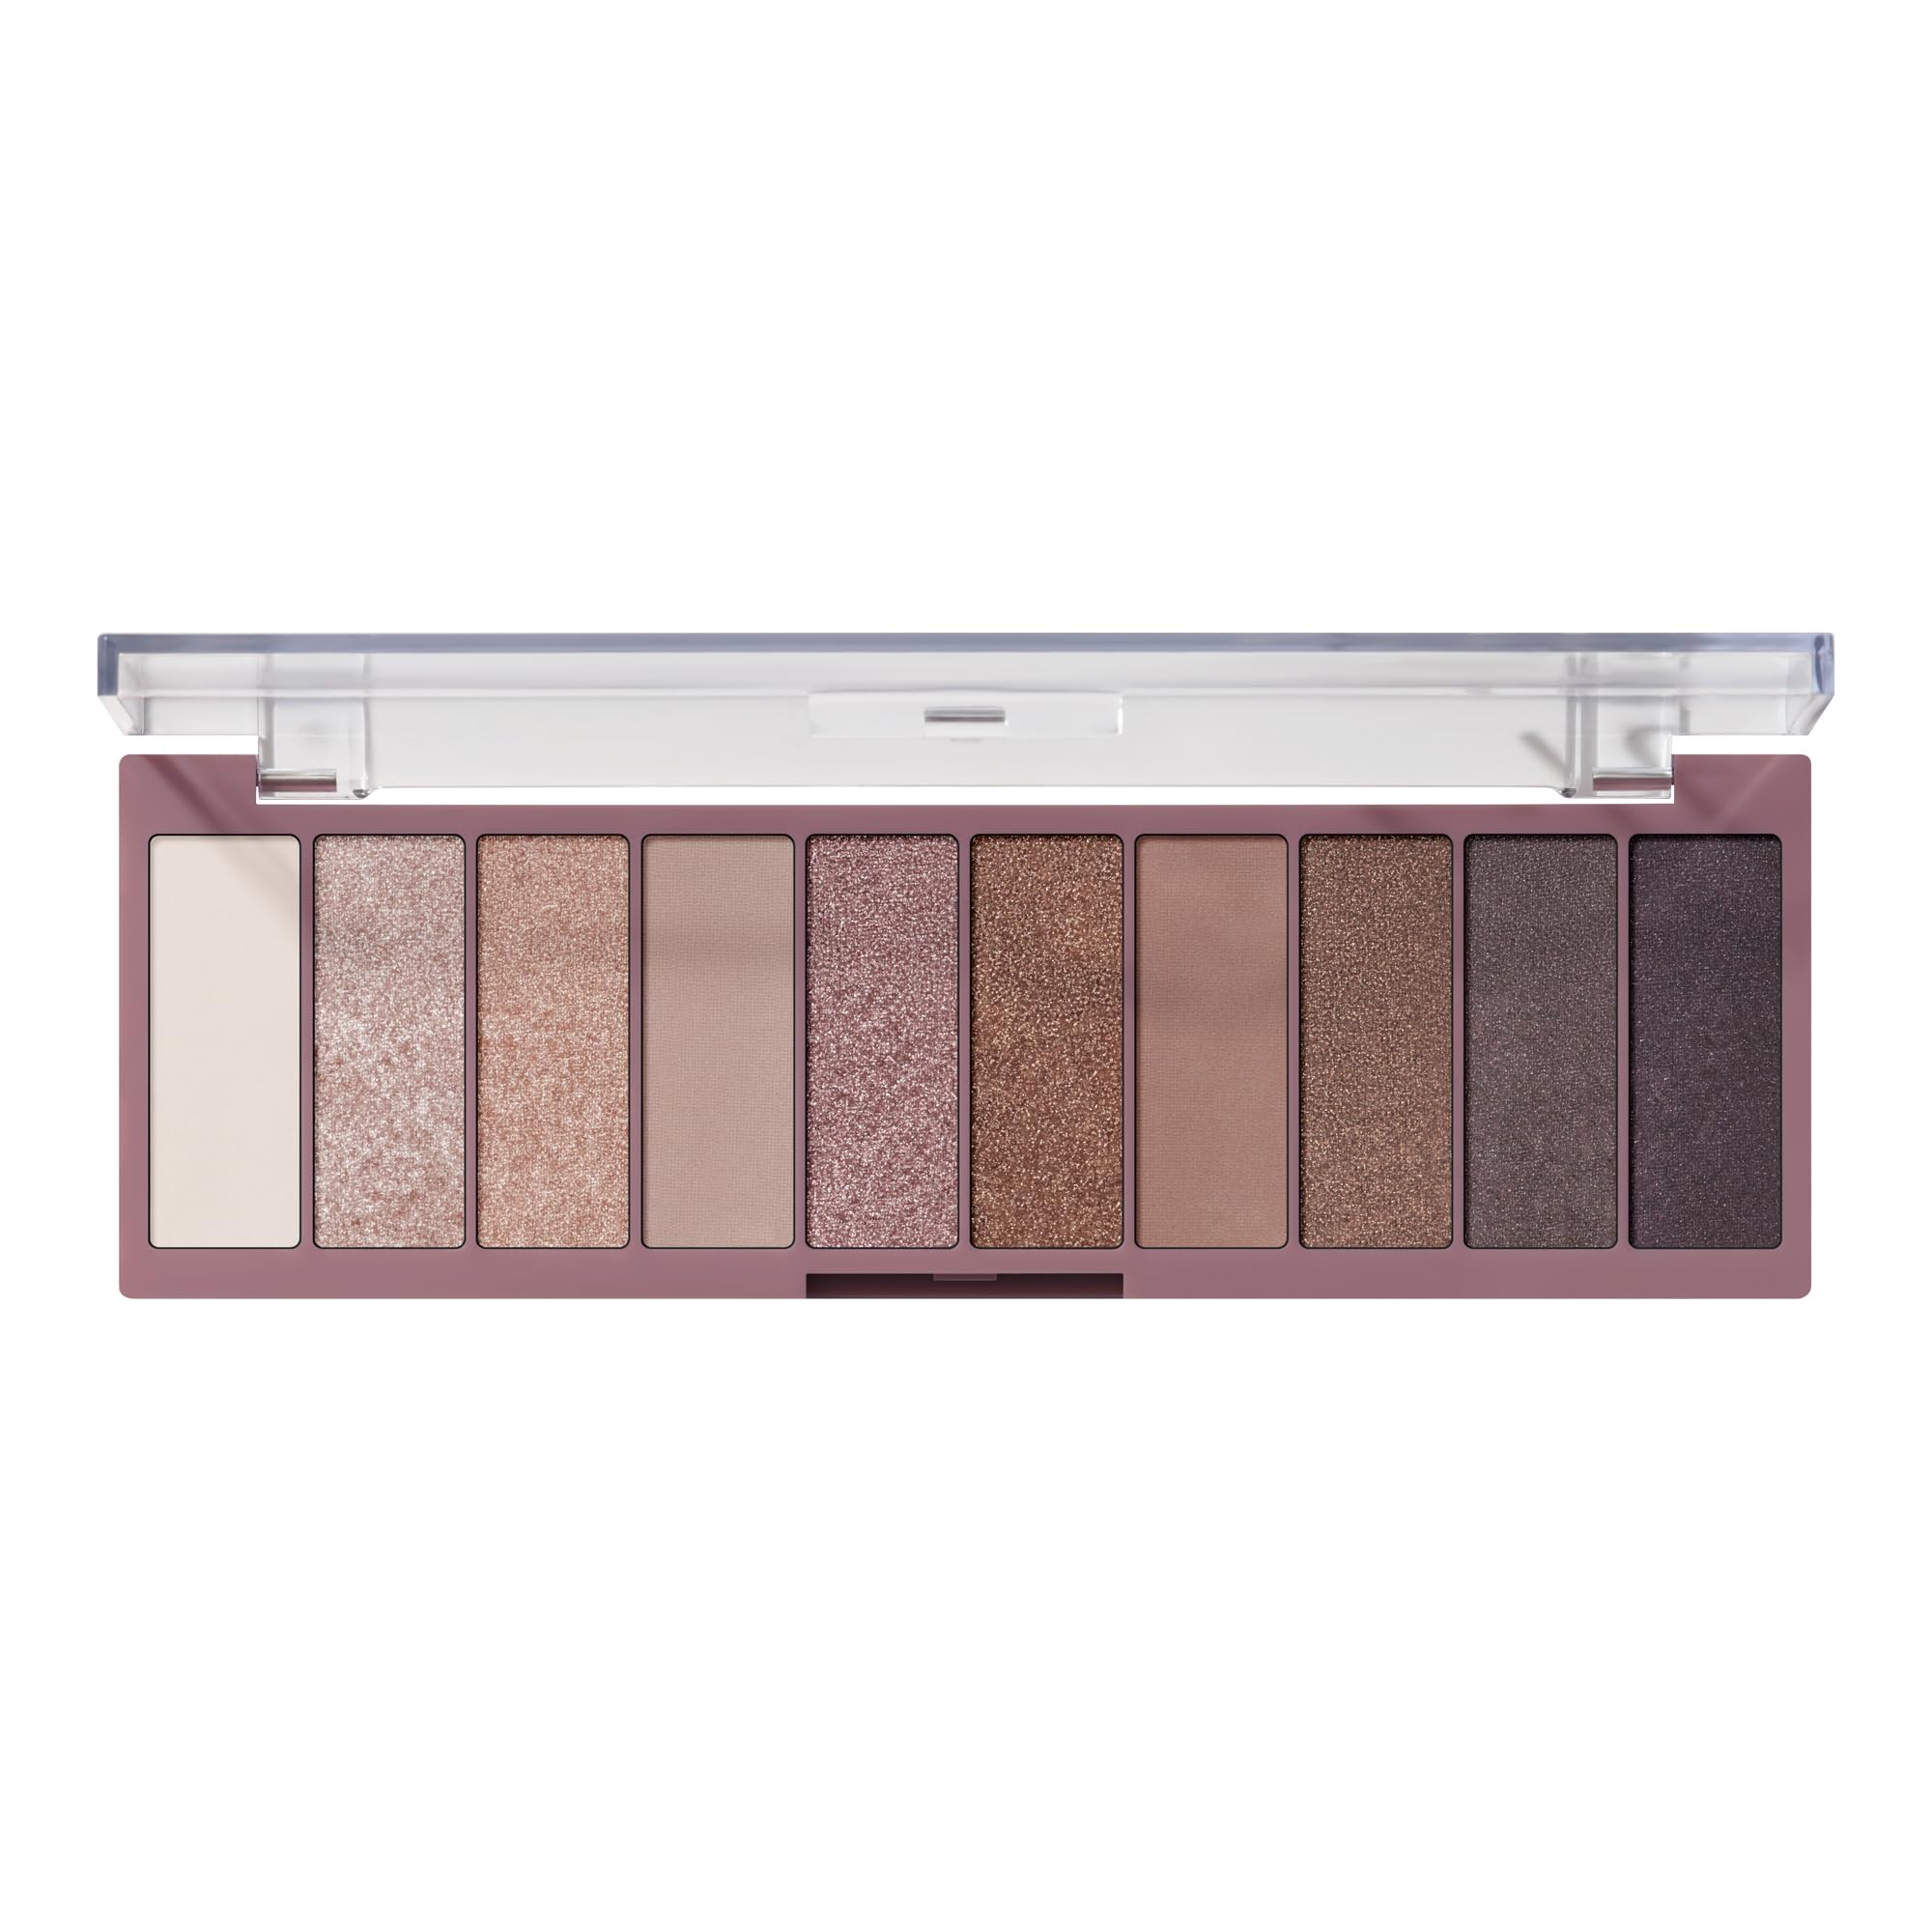 e.l.f. Perfect 10 Eyeshadow Palette, Ten Ultra-pigmented Shimmer & Matte Shades, Creamy & Blendable Formula, Vegan & Cruelty-free, Nude Rose Gold